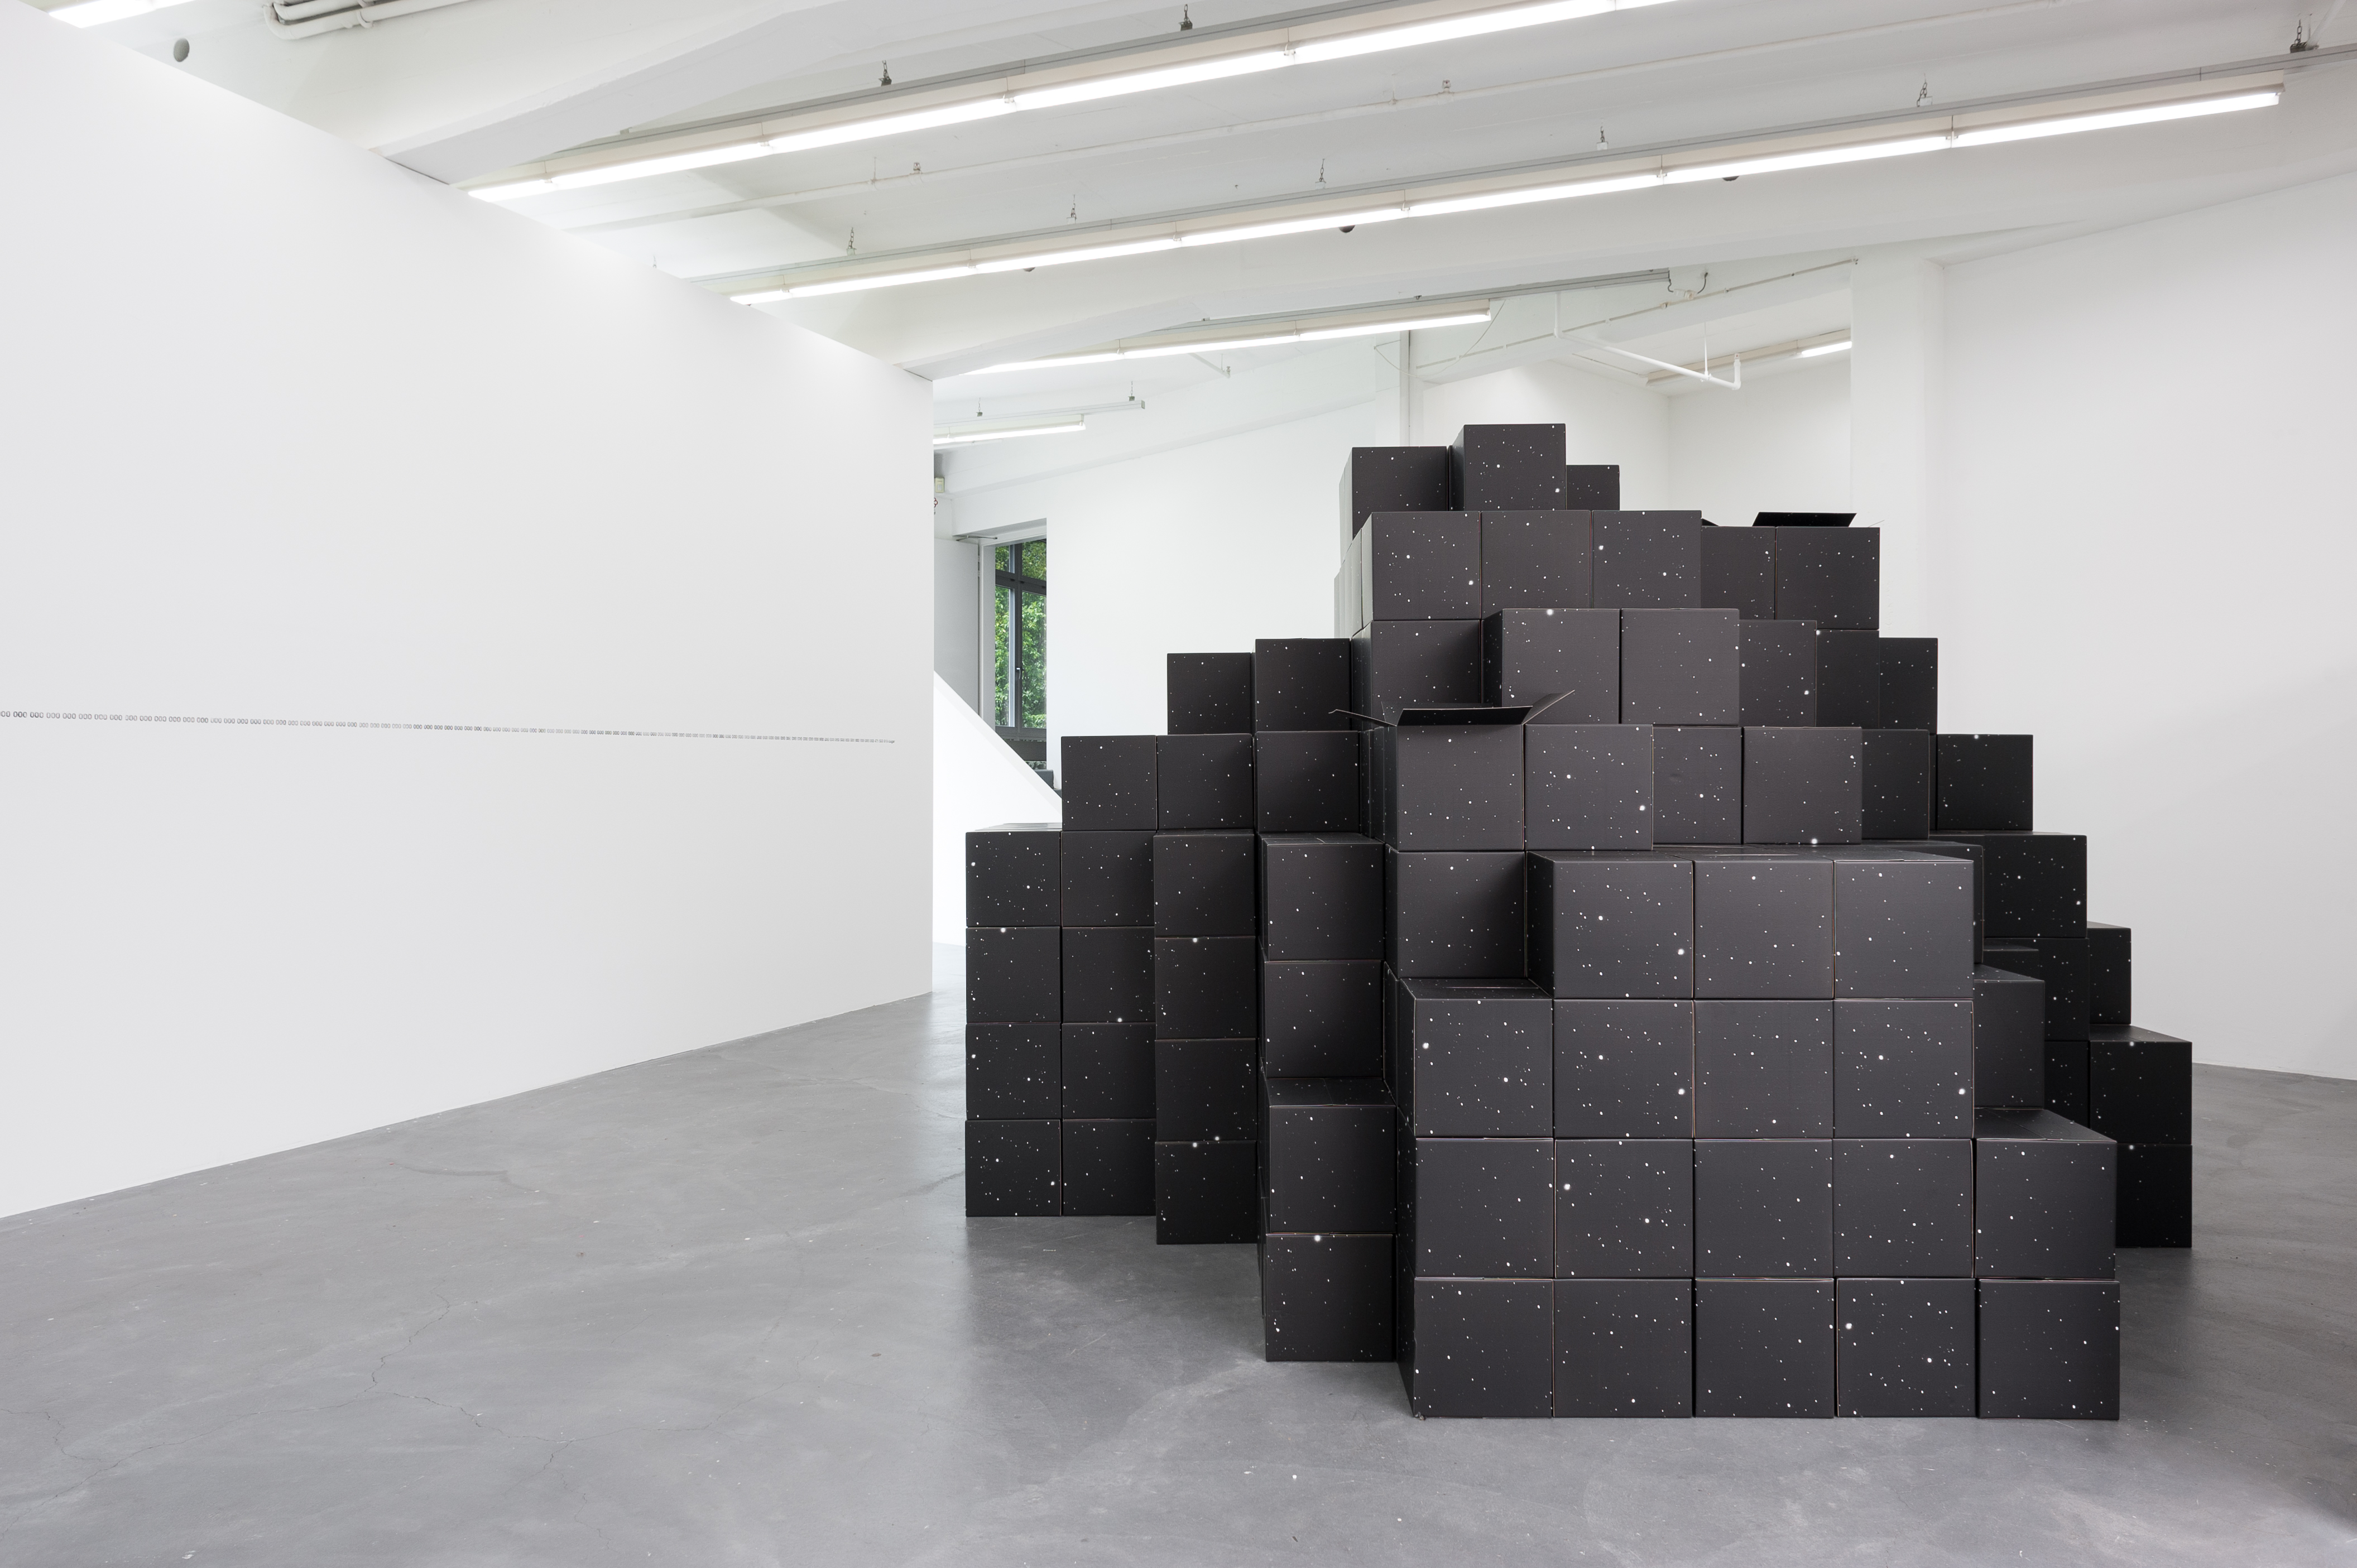 Folded into One, carboard boxes printed on both sides, variable dimensions (each unit 30 x 30 x 30 cm), 2012. Exhibition view at Kunsthaus Baselland, photo: Emile Ouroumow, 2015